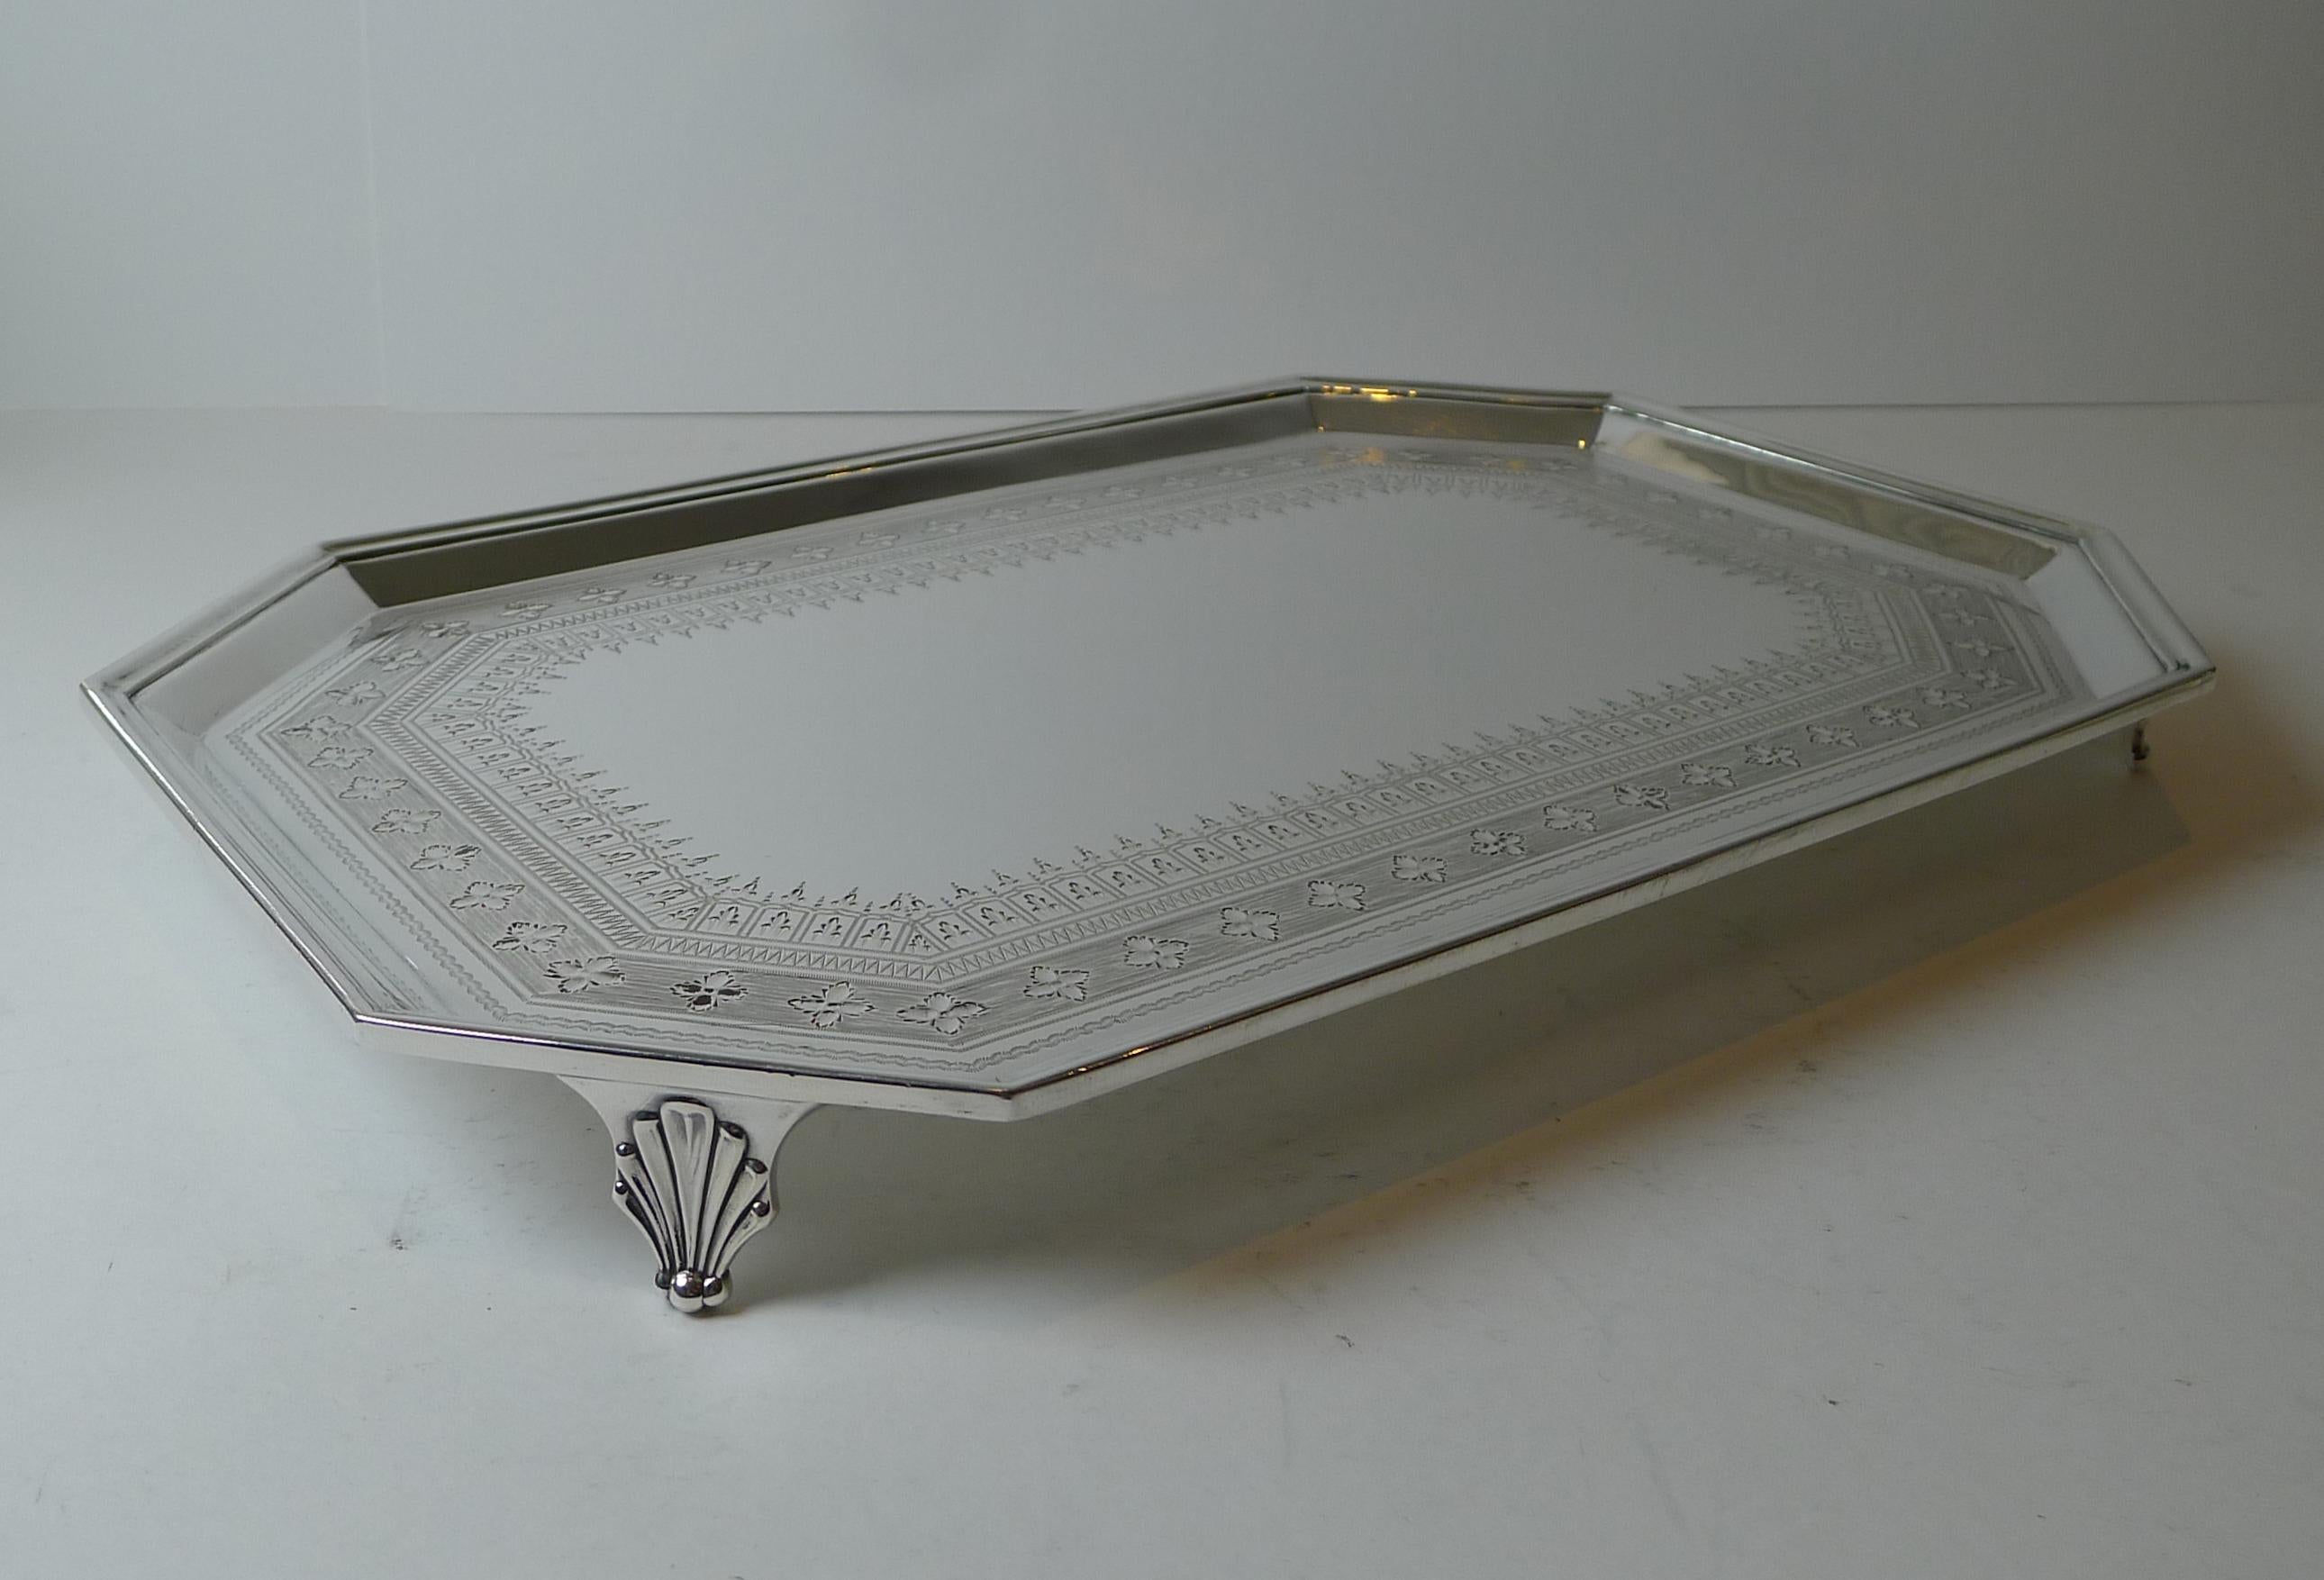 A stunning antique English silver plated cocktail or drinks tray made by the top-notch London silversmith 